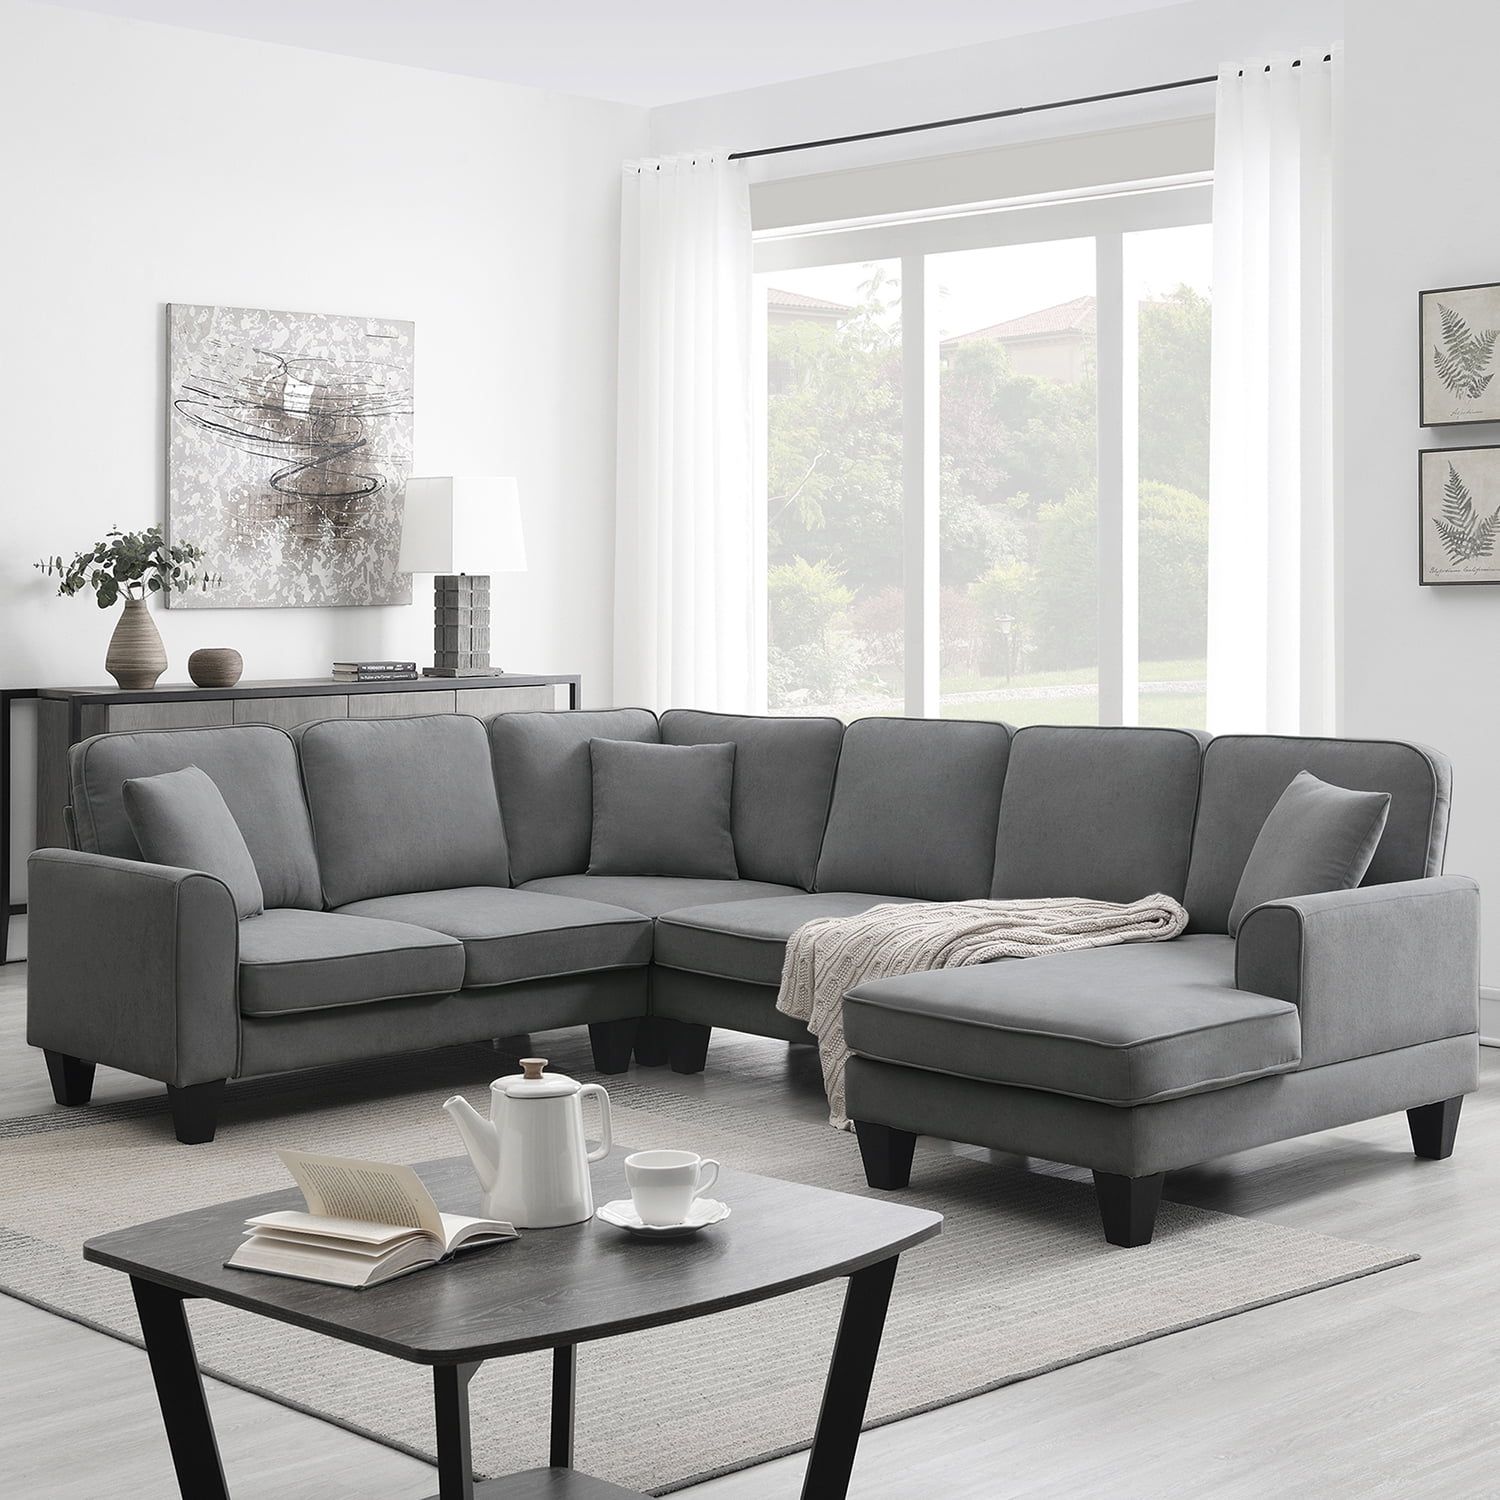 Churanty Convertible Modular Sectional Sofa With Chaise And Recliner,u  Shaped Couch 7 Seat Fabric Sleeper Sofa For Living Room,dark Gray –  Walmart With Regard To Dark Gray Sectional Sofas (View 14 of 15)